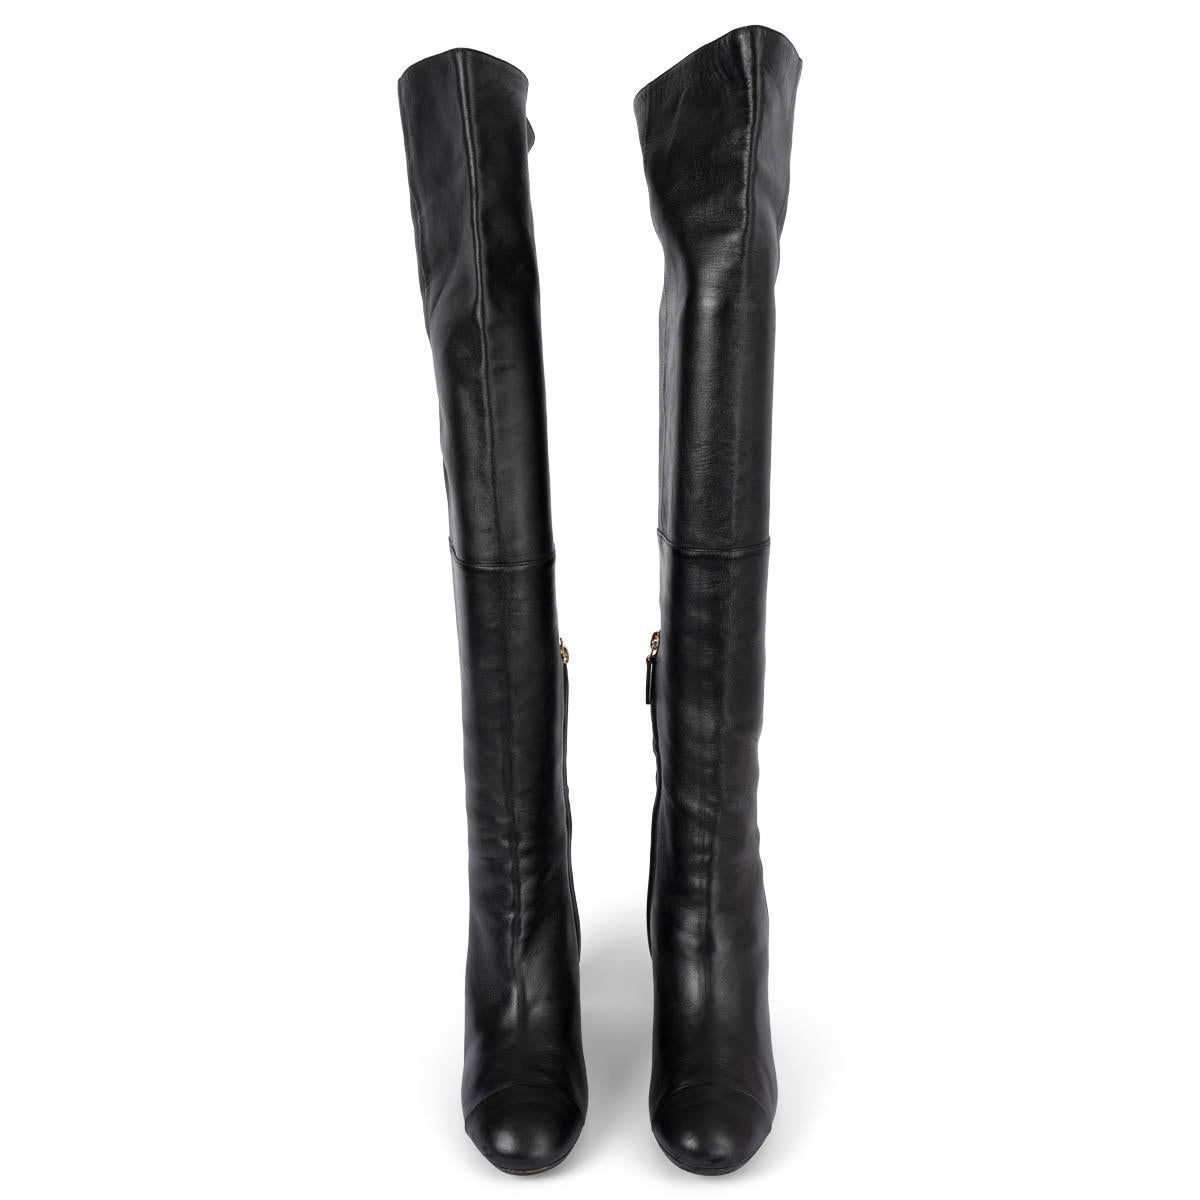 100% authentic Chanel CC over-knee boots in smooth soft lambskin. The design features the calssic cap toe, inside zipper and CC logo stitching on the inner shaft. Have been worn and show some wear to the tips and one zipper pull is missing. Overall